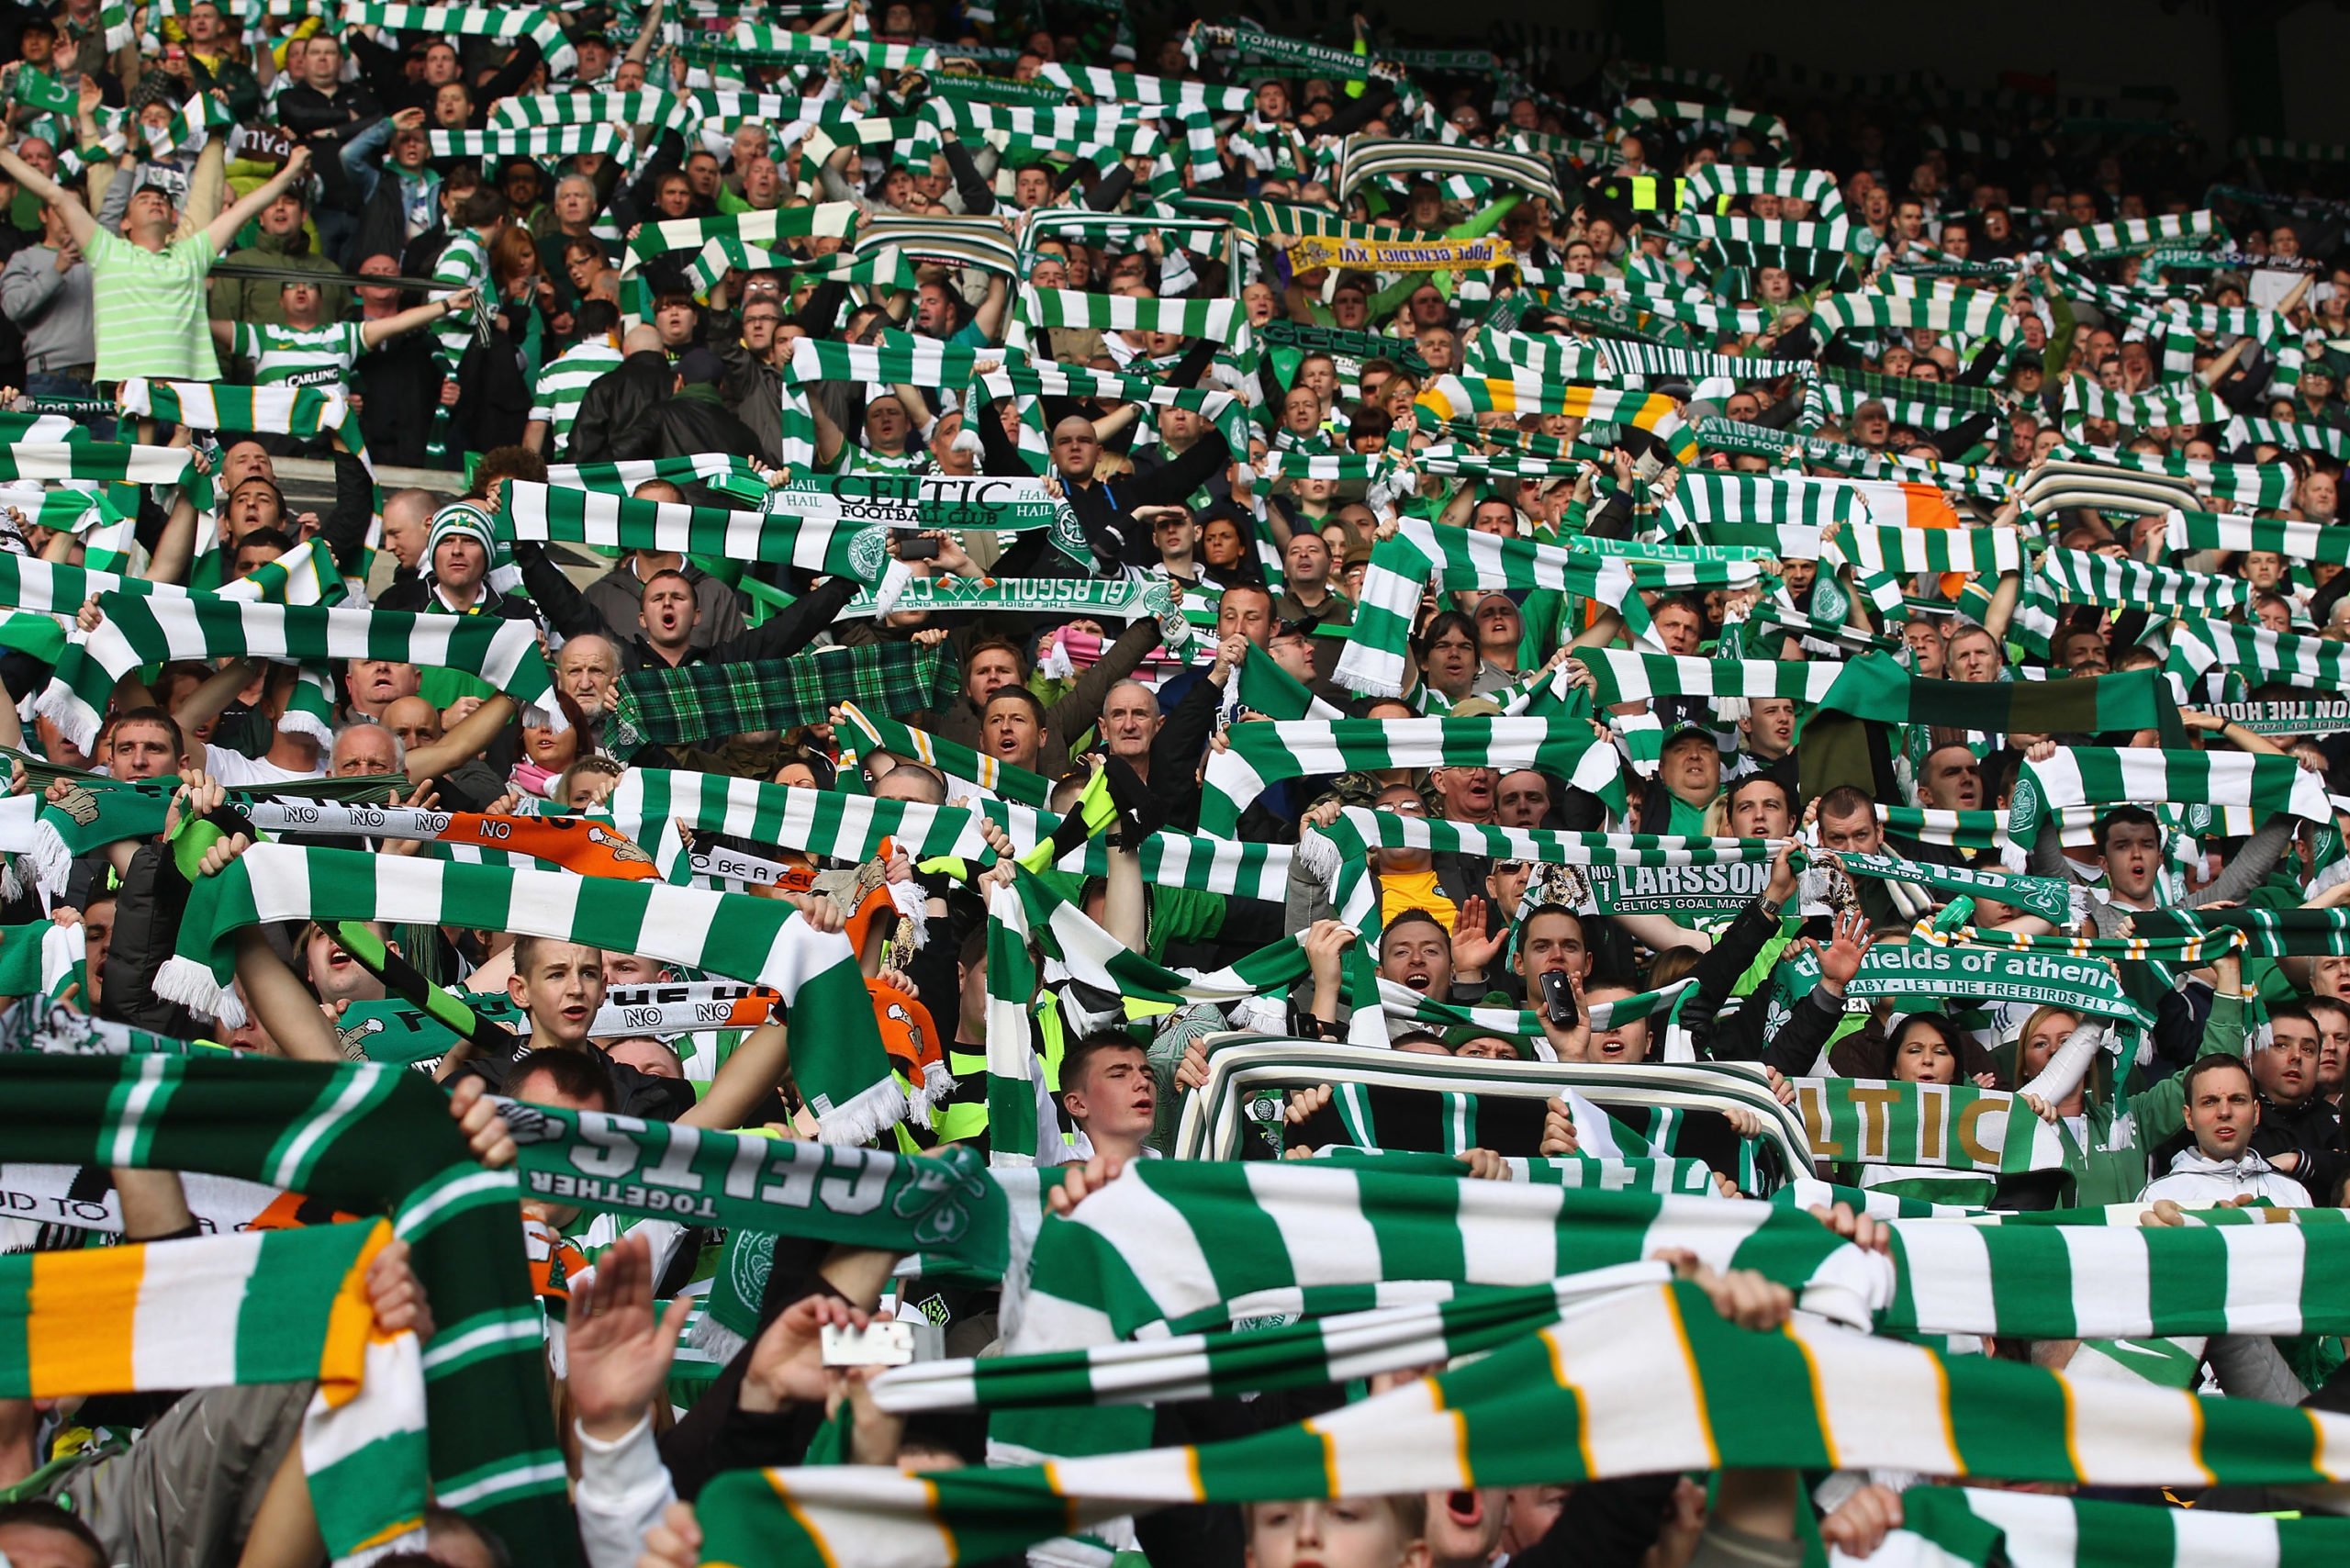 Celtic 'fan media' isn't going anywhere - in fact, it's getting bigger and better